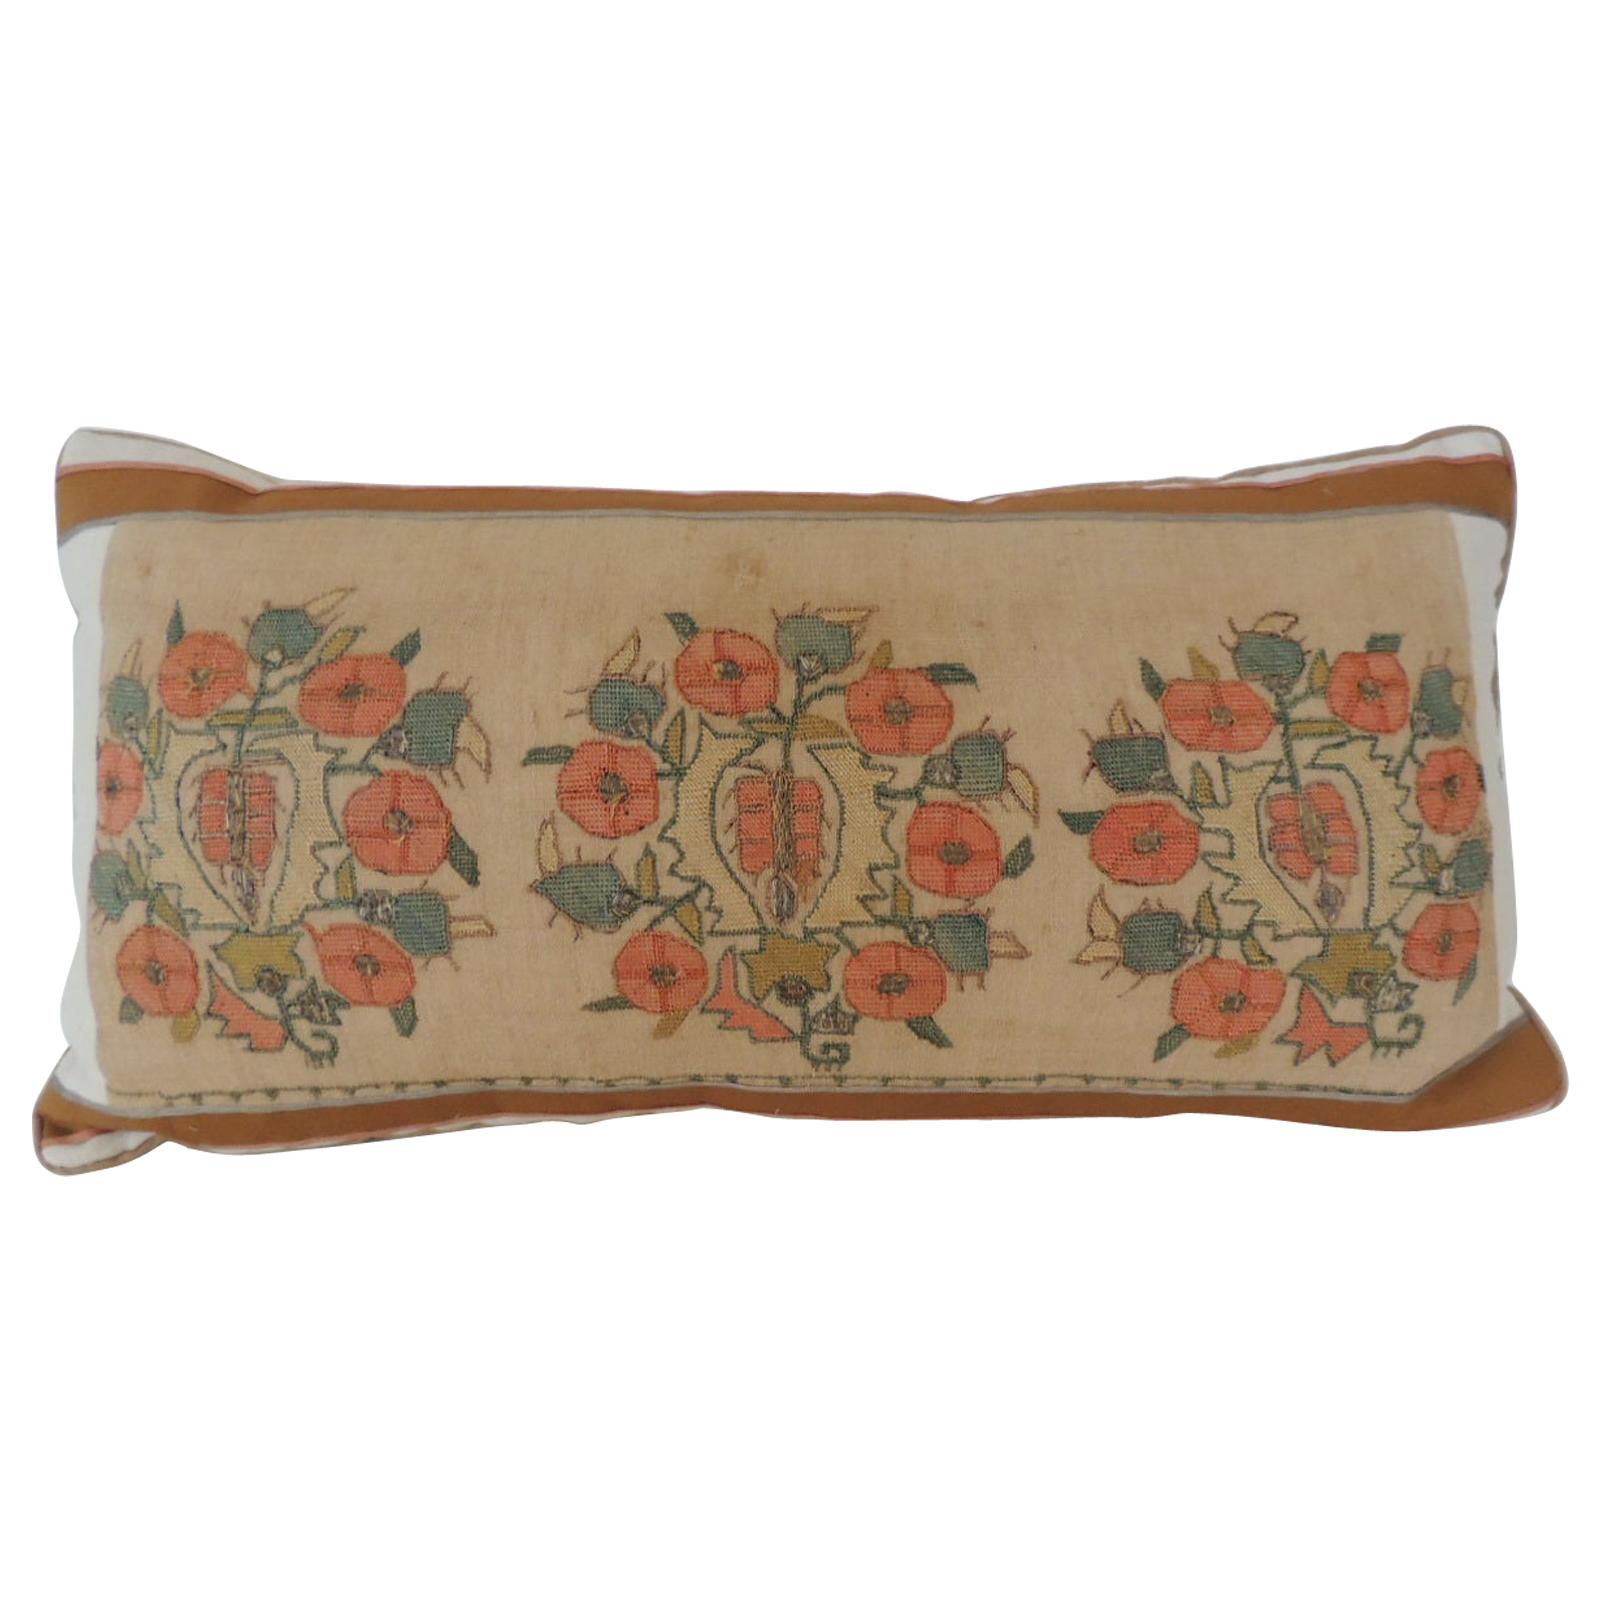 Orange and Green Floral Embroidery Decorative Bolster Pillow